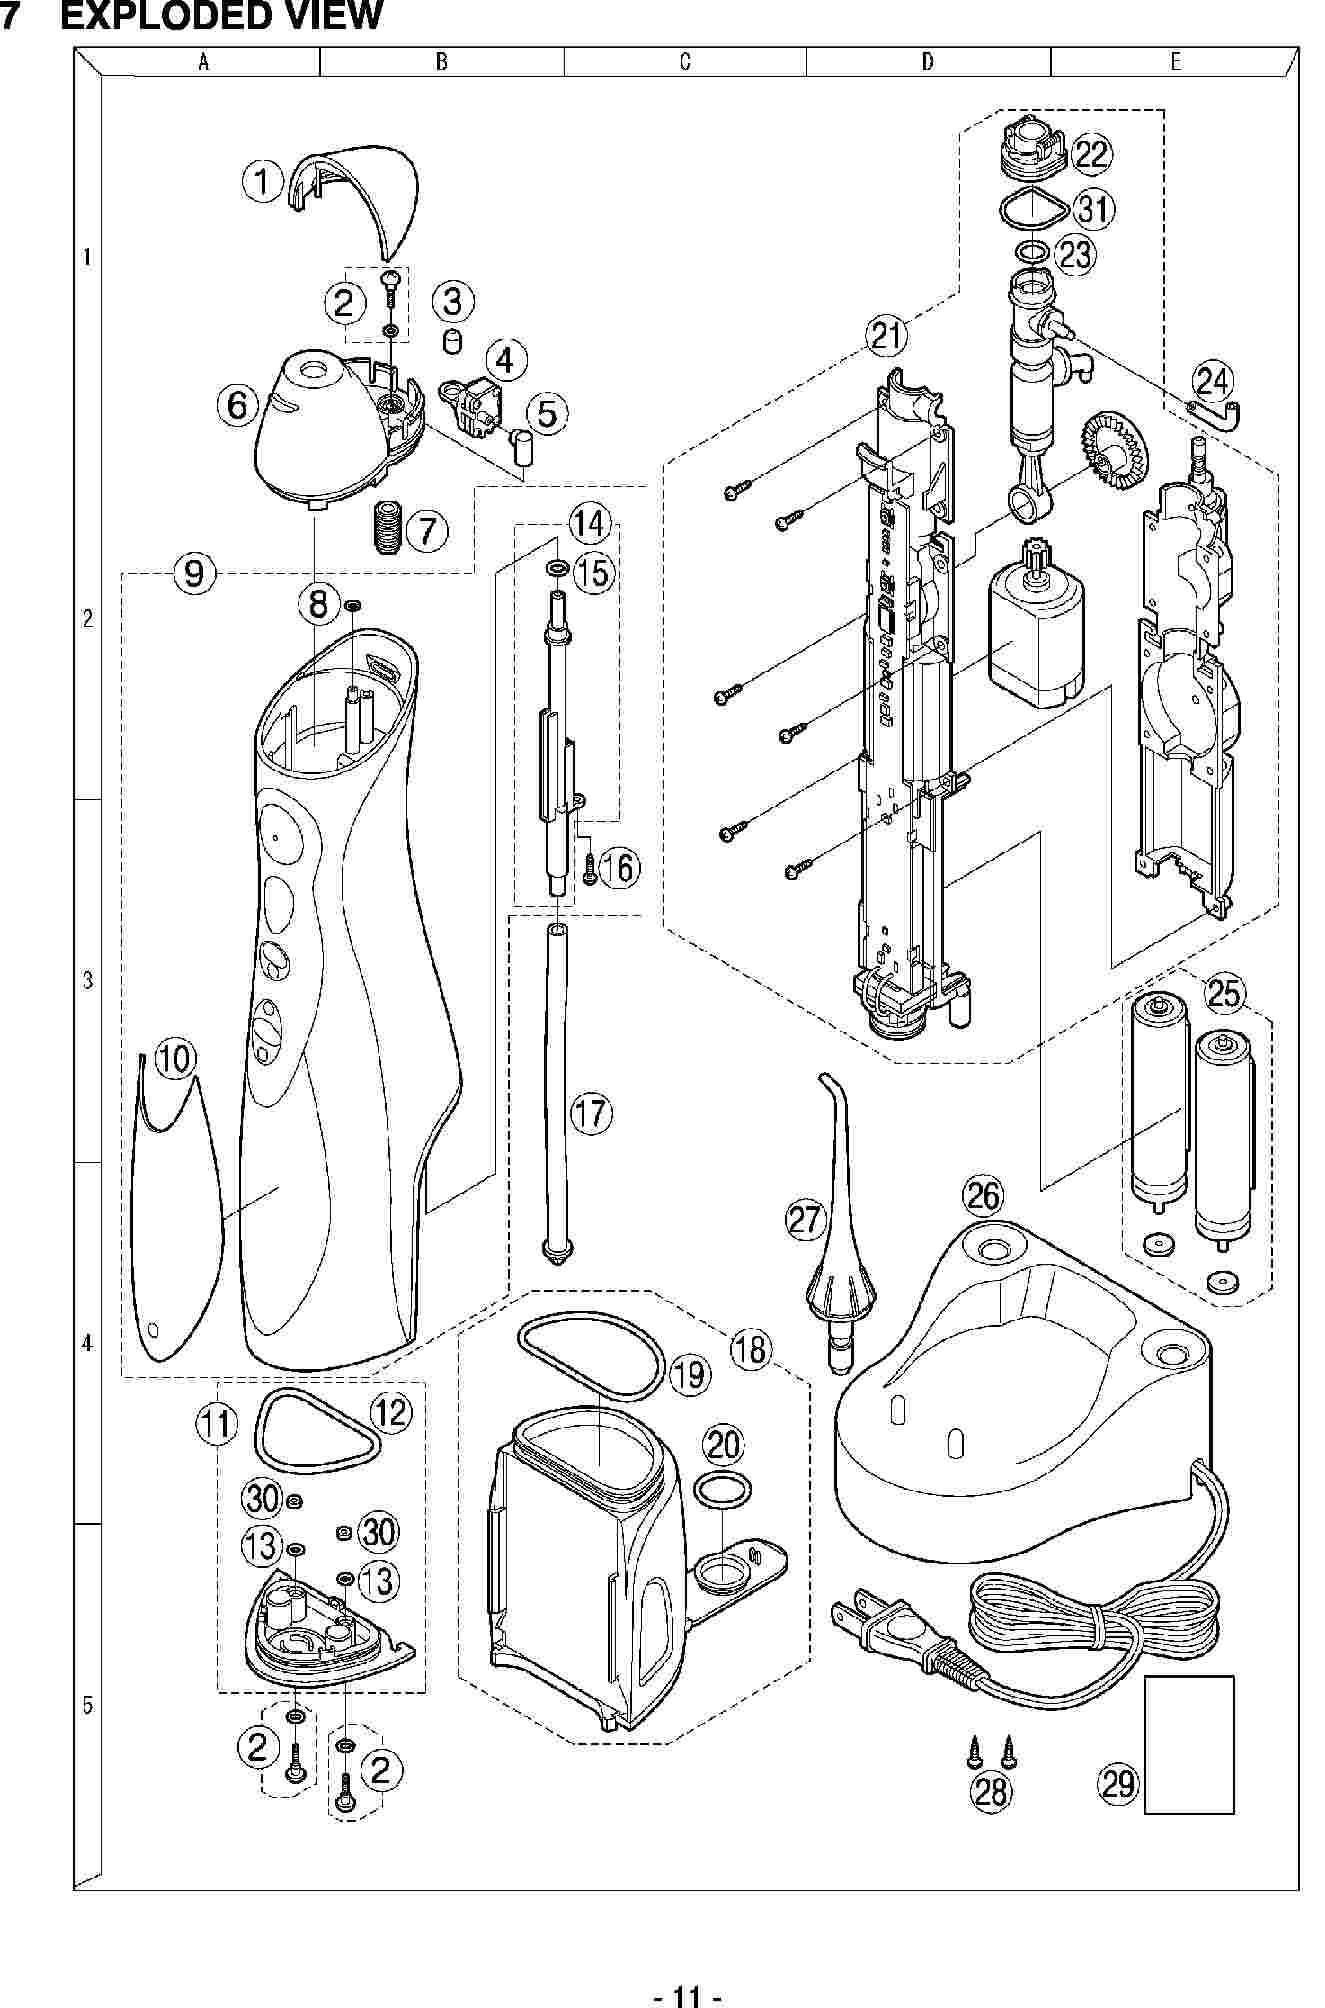 EW1211: Exploded View